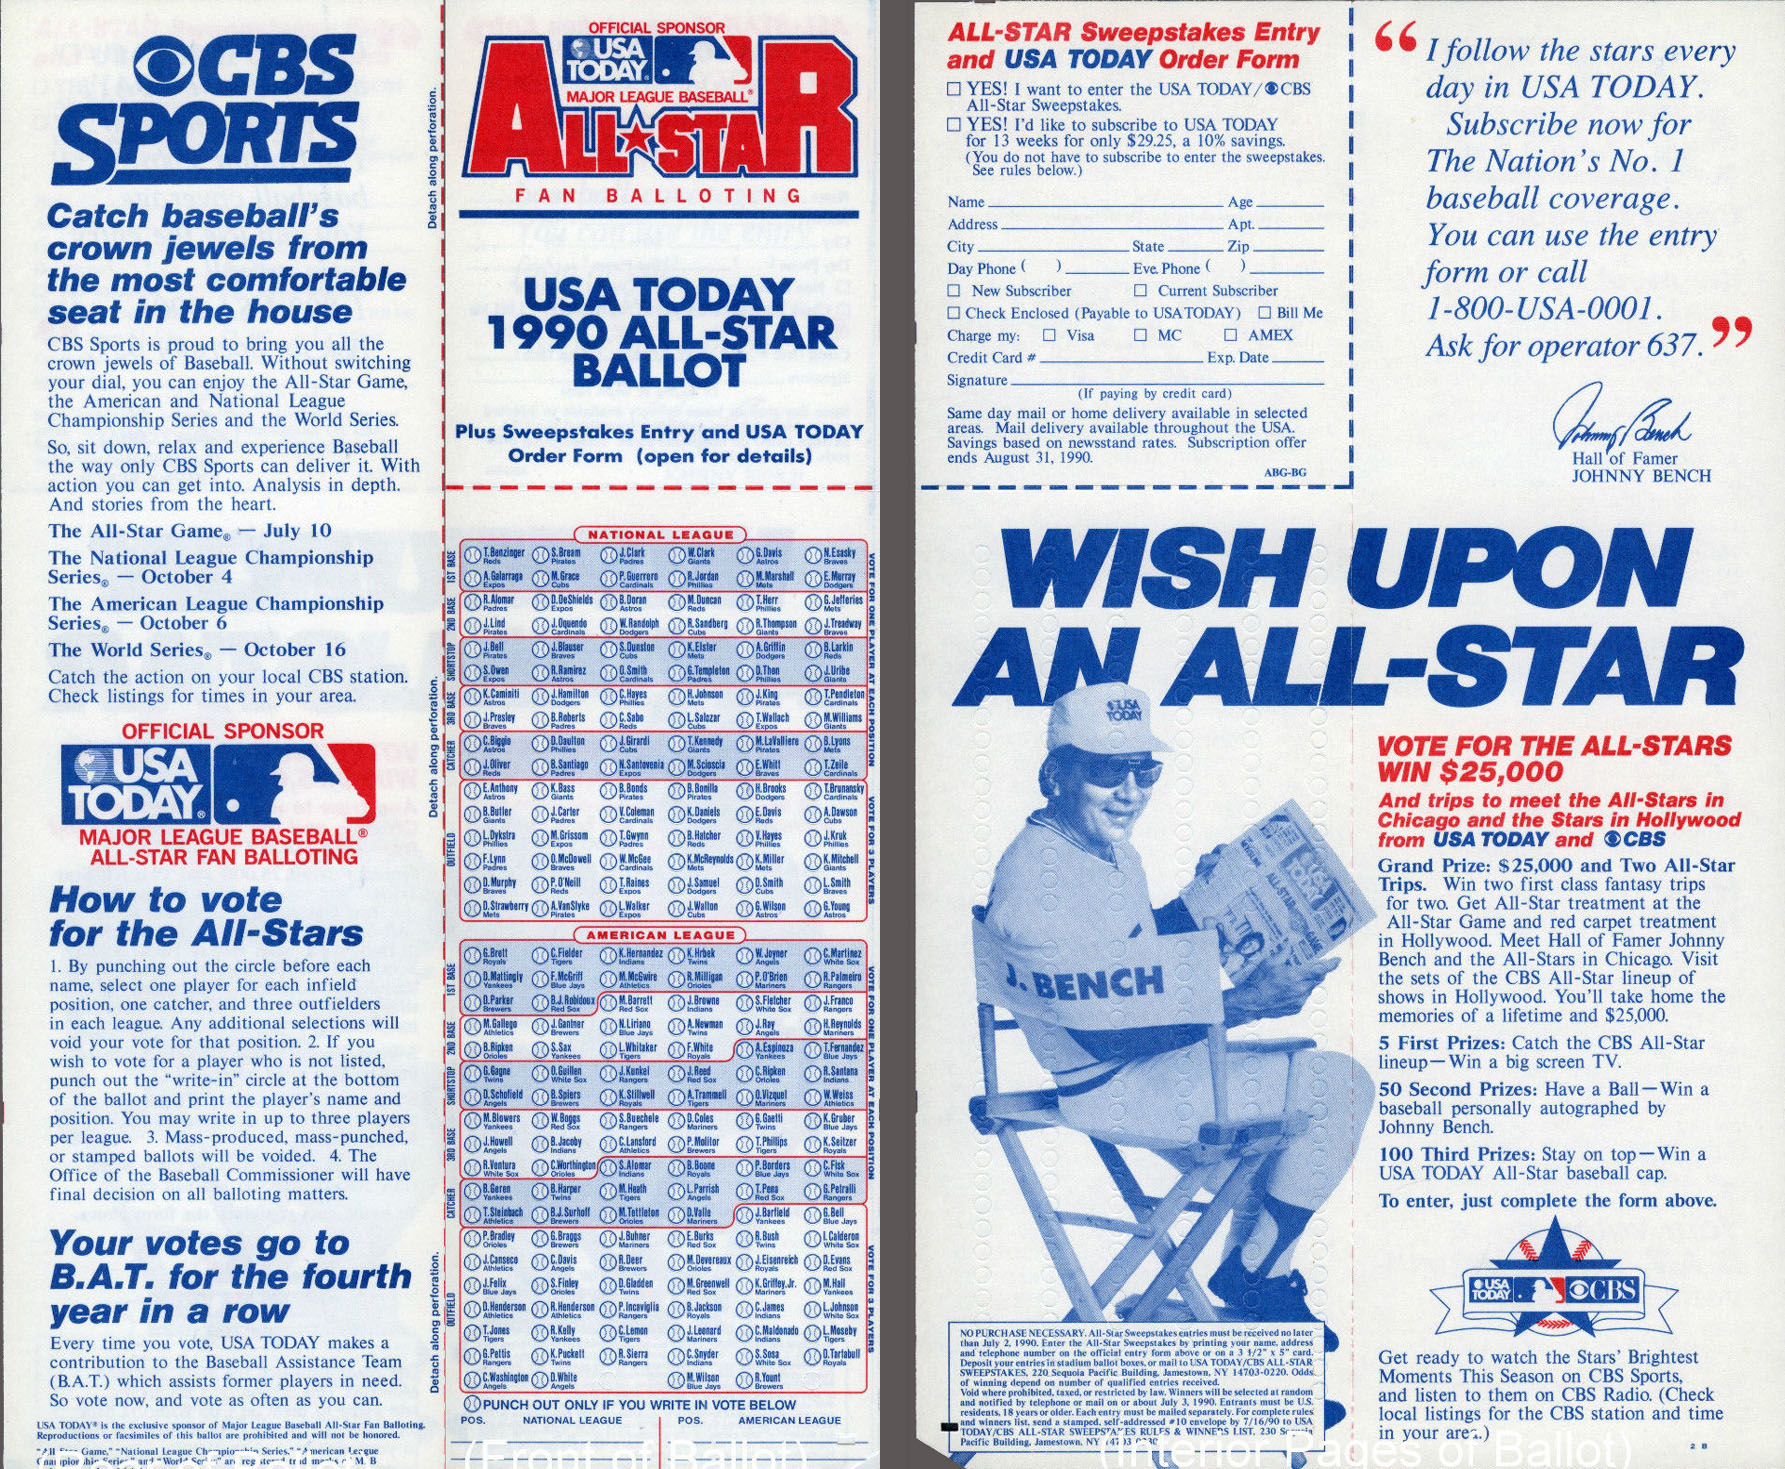 All Star Game Ballots